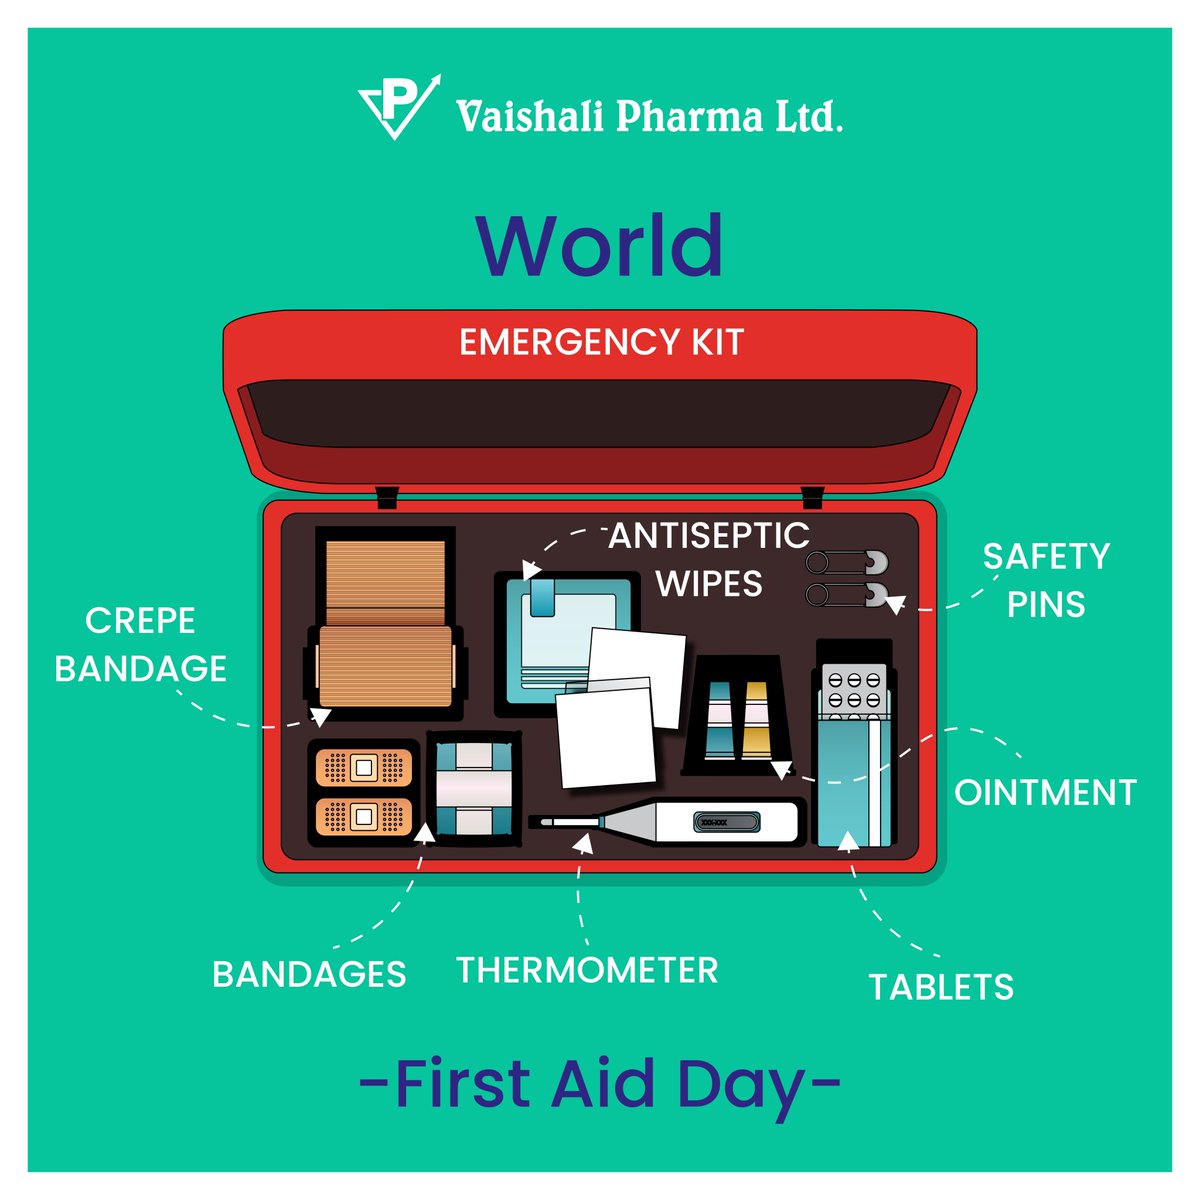 It is celebrated to raise public awareness of how #FirstAid can save thousands of lives in everyday crises.
Make sure you carry the few basics everywhere.
#WorldFirstAidDay 
#VaishaliPharma #FirstAidKit #bandages #antisepticwipes #ointment #thermometer #safety #bandaid #savelives